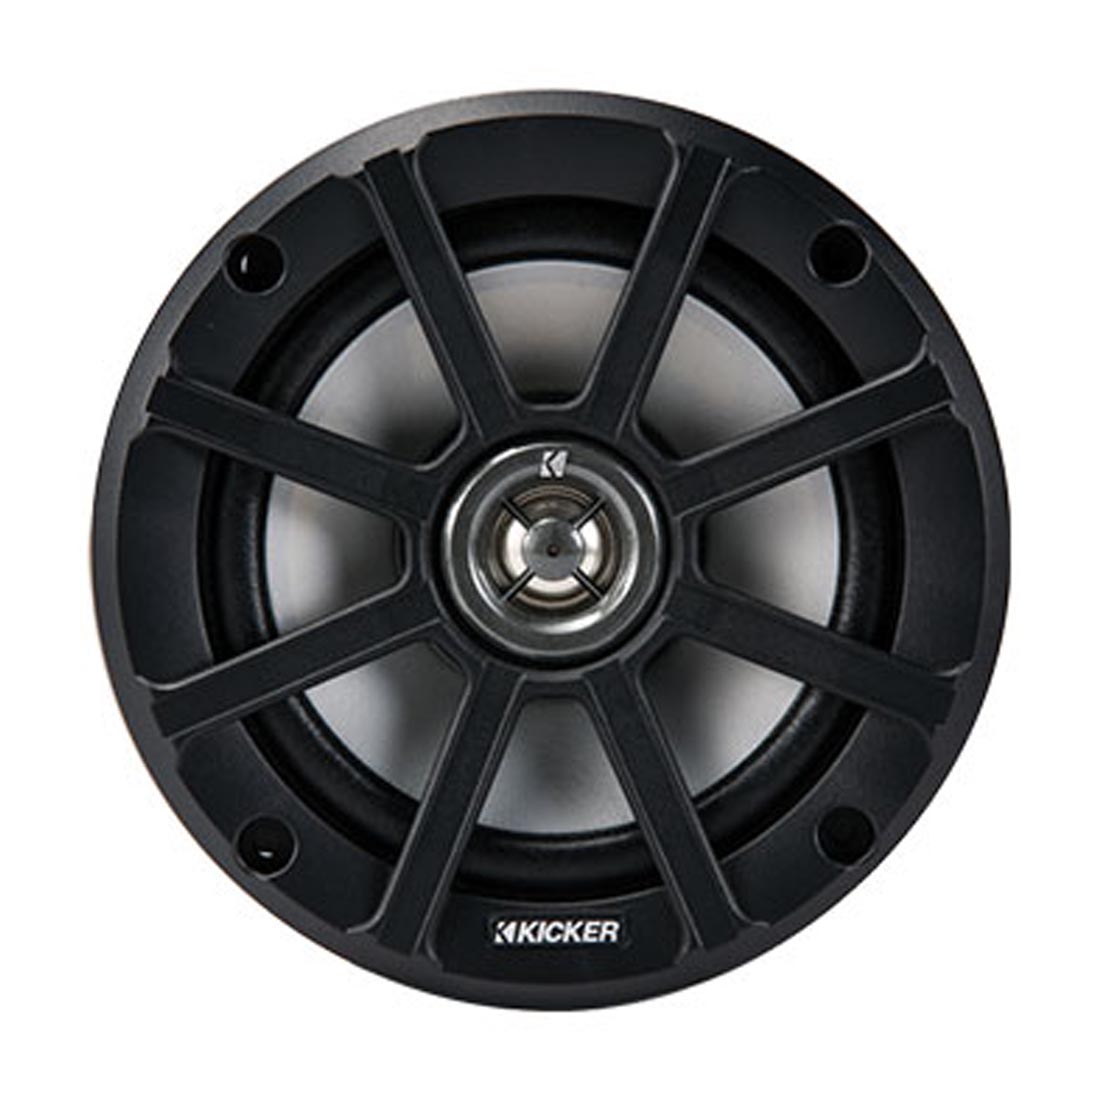 Kicker 42PSC652 6.5" 2-Way 2-Ohm Speakers for use in Motorcycles, Boats, and Off-Road Vehicles